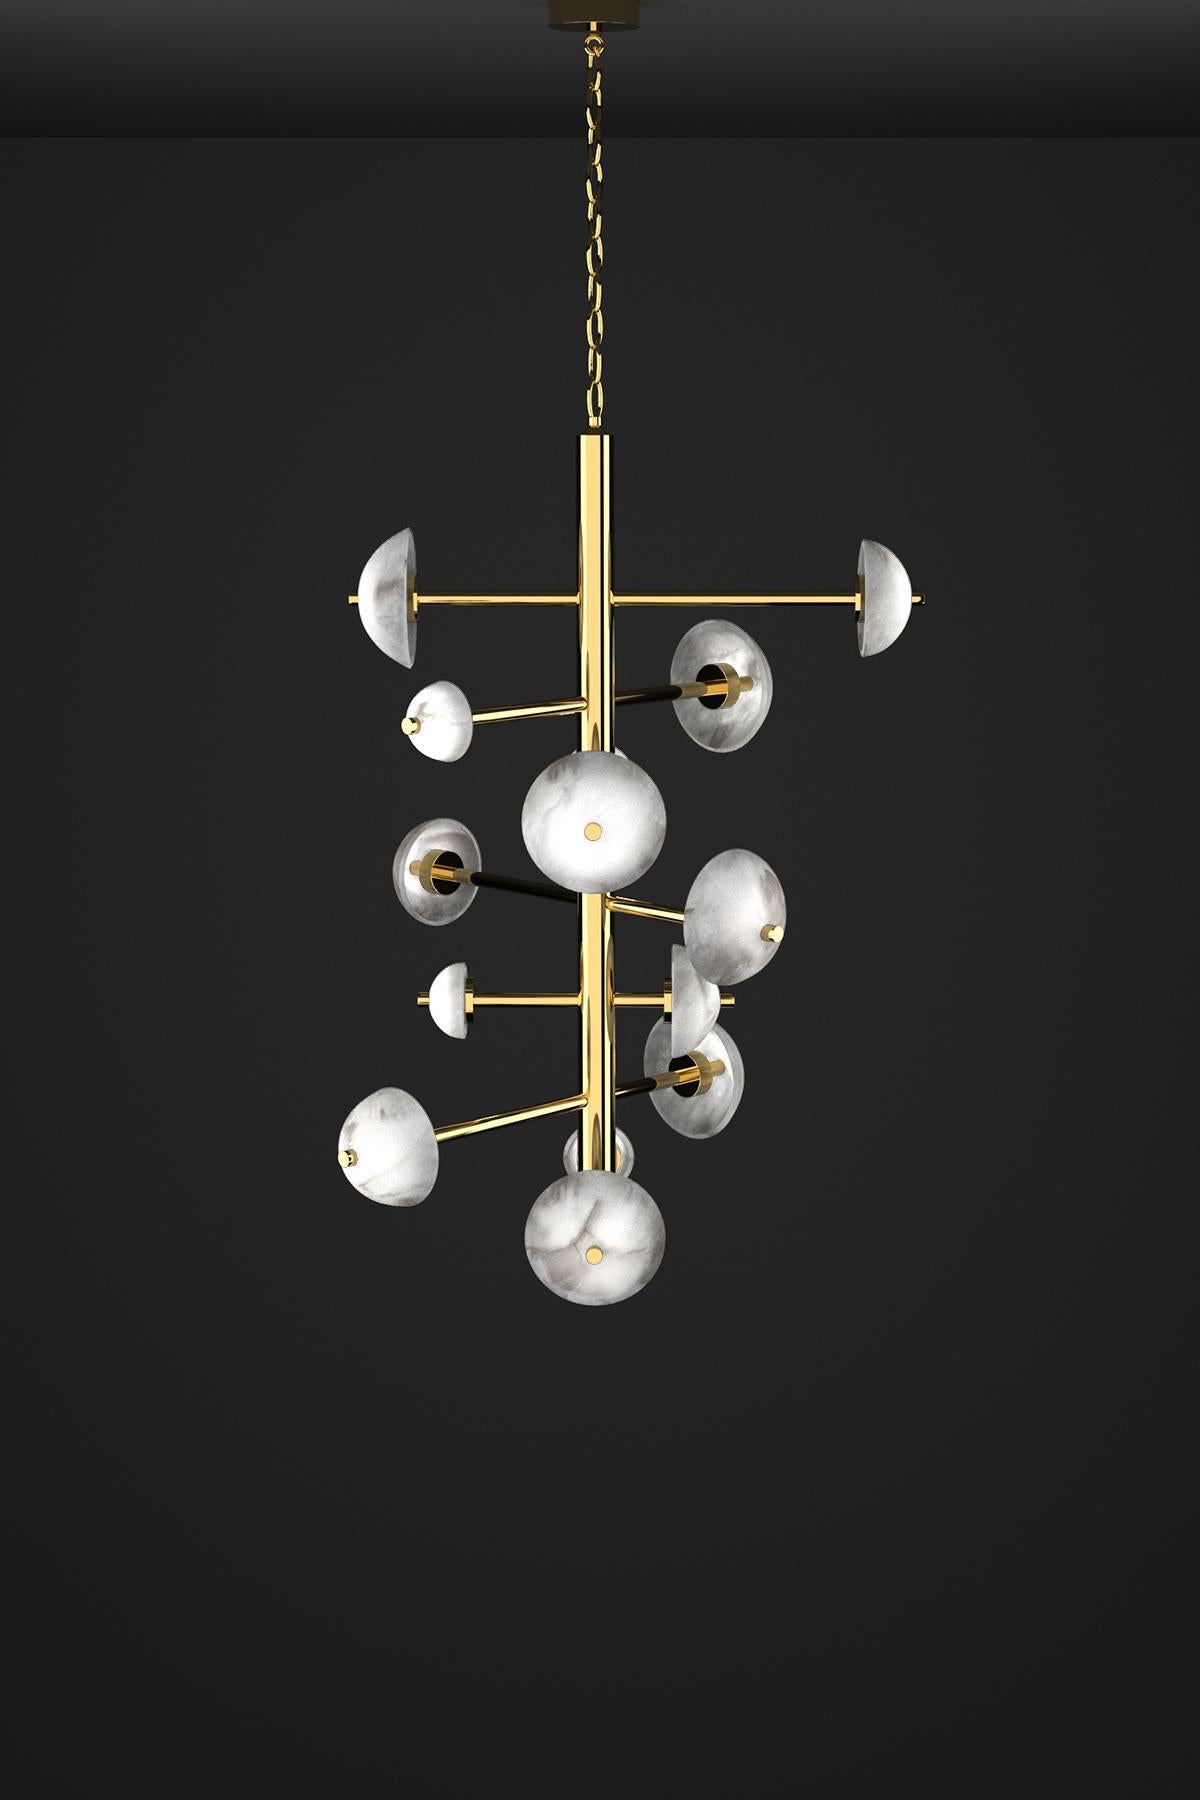 Apollo Shiny Gold Metal Chandelier by Alabastro Italiano
Dimensions: D 70,5 x W 55 x H 111 cm.
Materials: White alabaster and metal.

Available in different finishes: Shiny Silver, Bronze, Brushed Brass, Ruggine of Florence, Brushed Burnished, Shiny